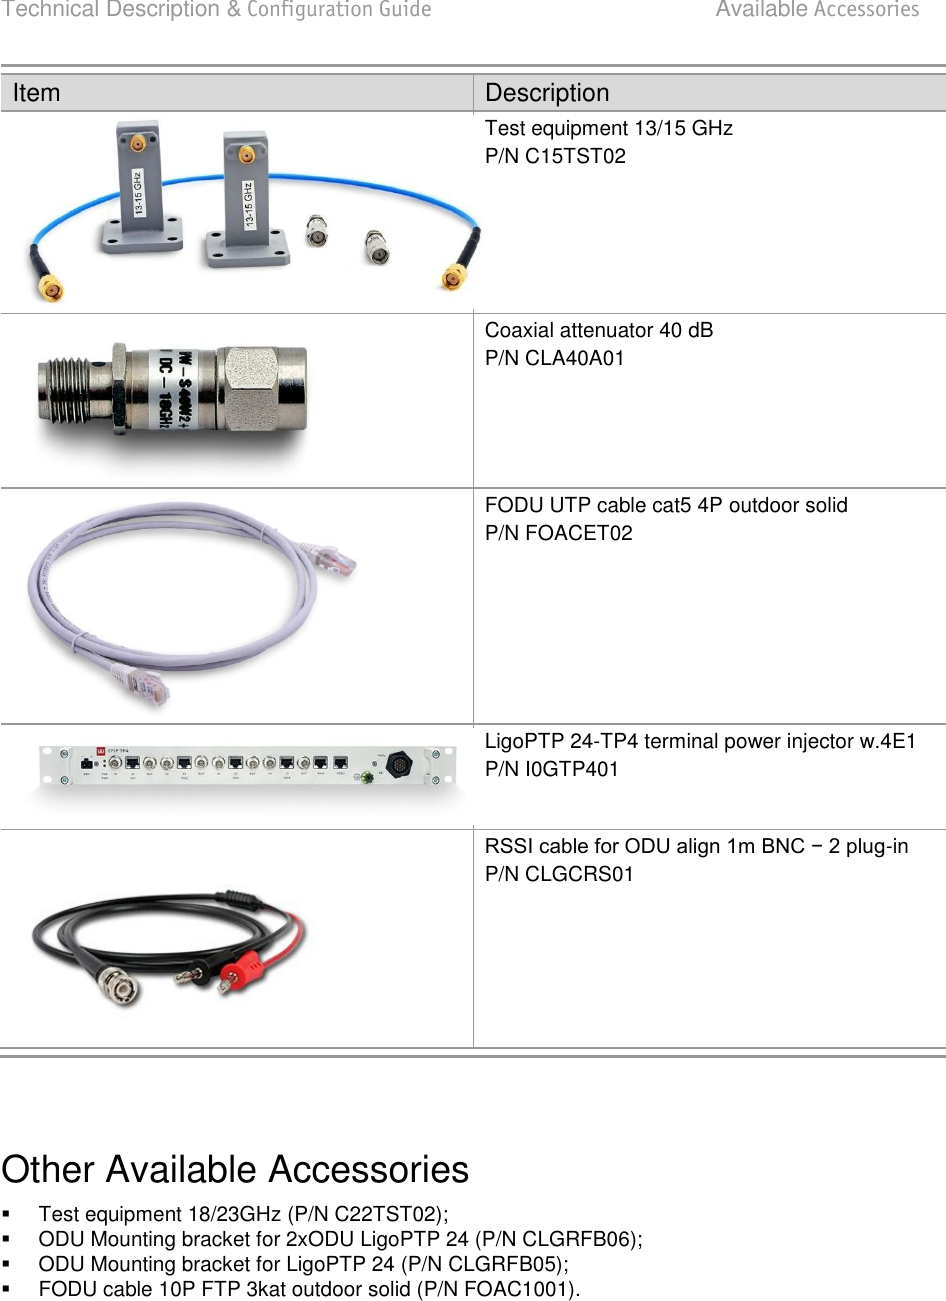 Technical Description &amp; Configuration Guide  Available Accessories  LigoWave  Page 92 Item Description  Test equipment 13/15 GHz P/N C15TST02  Coaxial attenuator 40 dB P/N CLA40A01  FODU UTP cable cat5 4P outdoor solid P/N FOACET02  LigoPTP 24-TP4 terminal power injector w.4E1 P/N I0GTP401  -in P/N CLGCRS01   Other Available Accessories   Test equipment 18/23GHz (P/N C22TST02);   ODU Mounting bracket for 2xODU LigoPTP 24 (P/N CLGRFB06);   ODU Mounting bracket for LigoPTP 24 (P/N CLGRFB05);   FODU cable 10P FTP 3kat outdoor solid (P/N FOAC1001).     